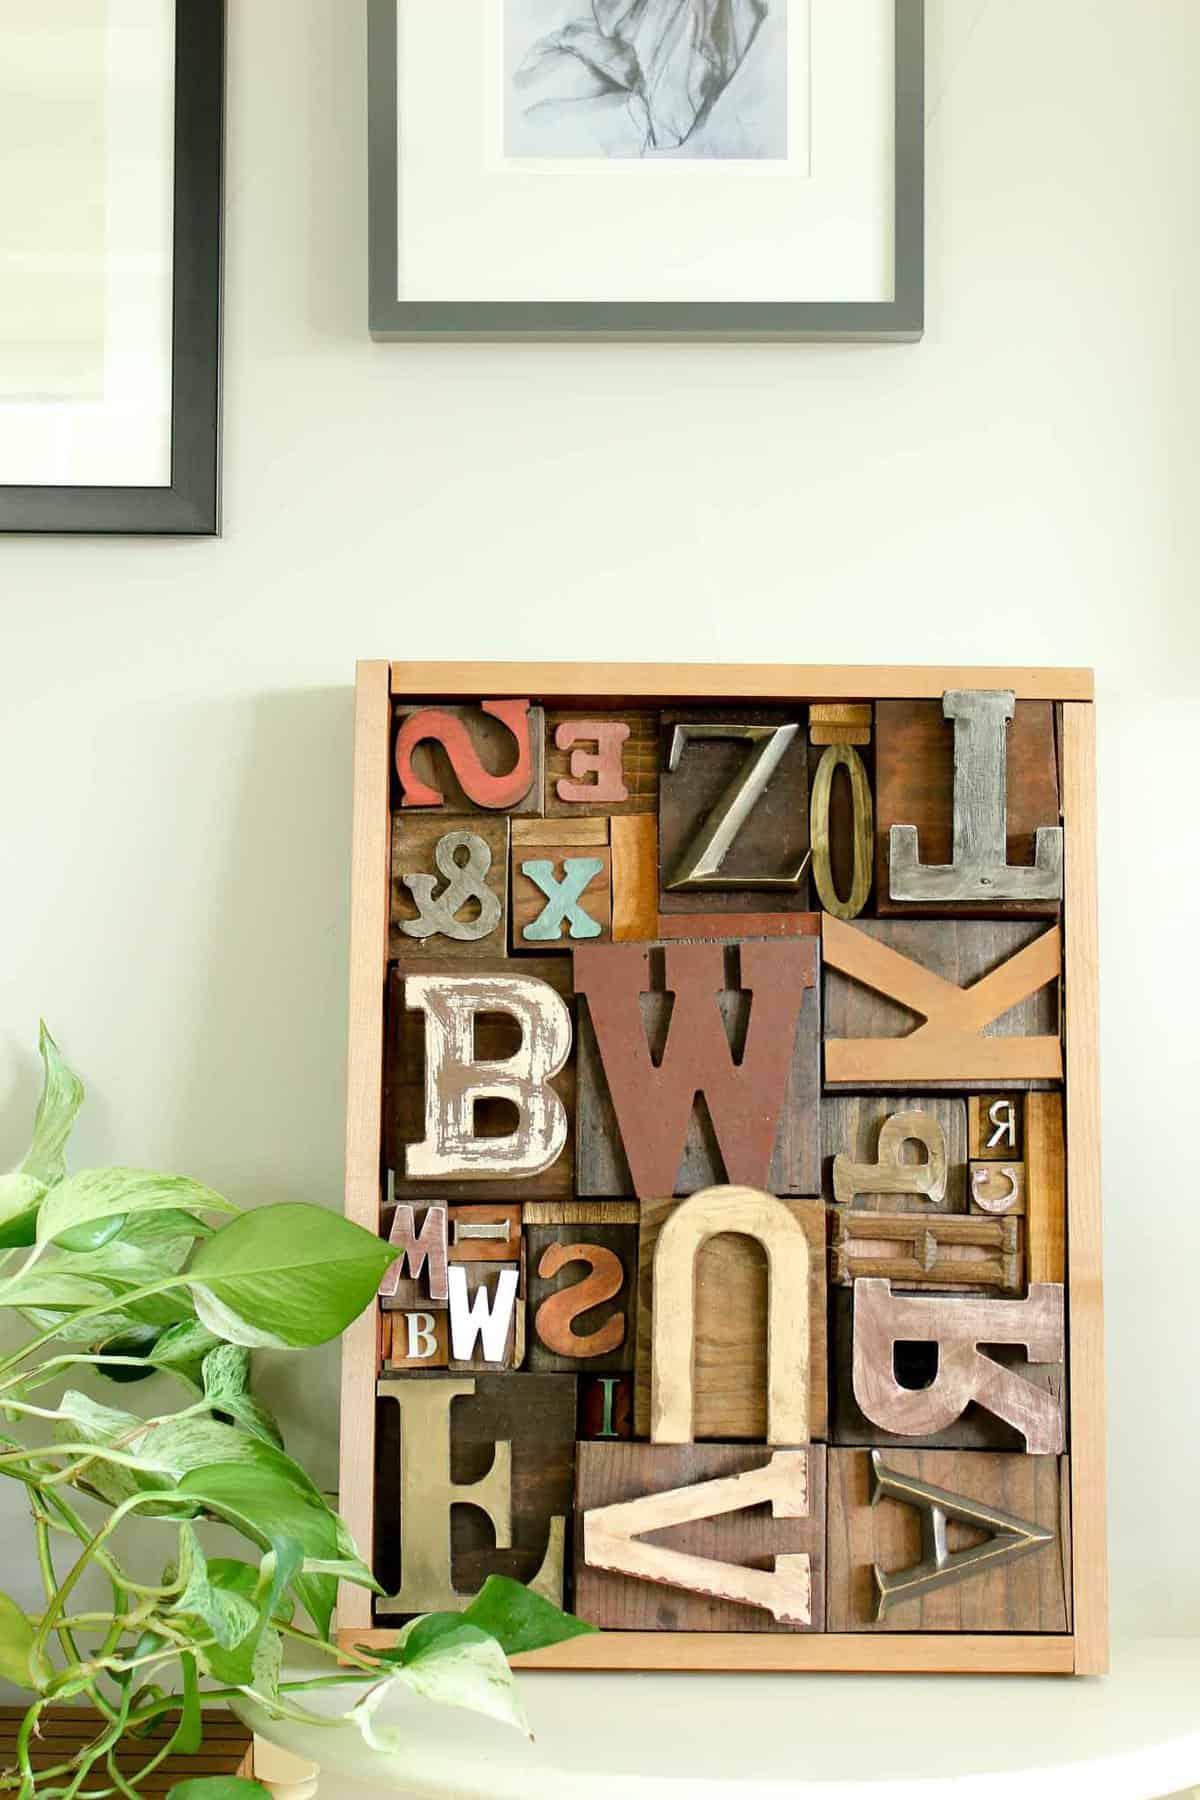 A DIY wall art idea that uses wooden letters (from any craft store) to make faux letterpress printing blocks. The vintage typography look adds so much charm to any room! Click for the full step-by-step tutorial. | MakeAndDoCrew.com